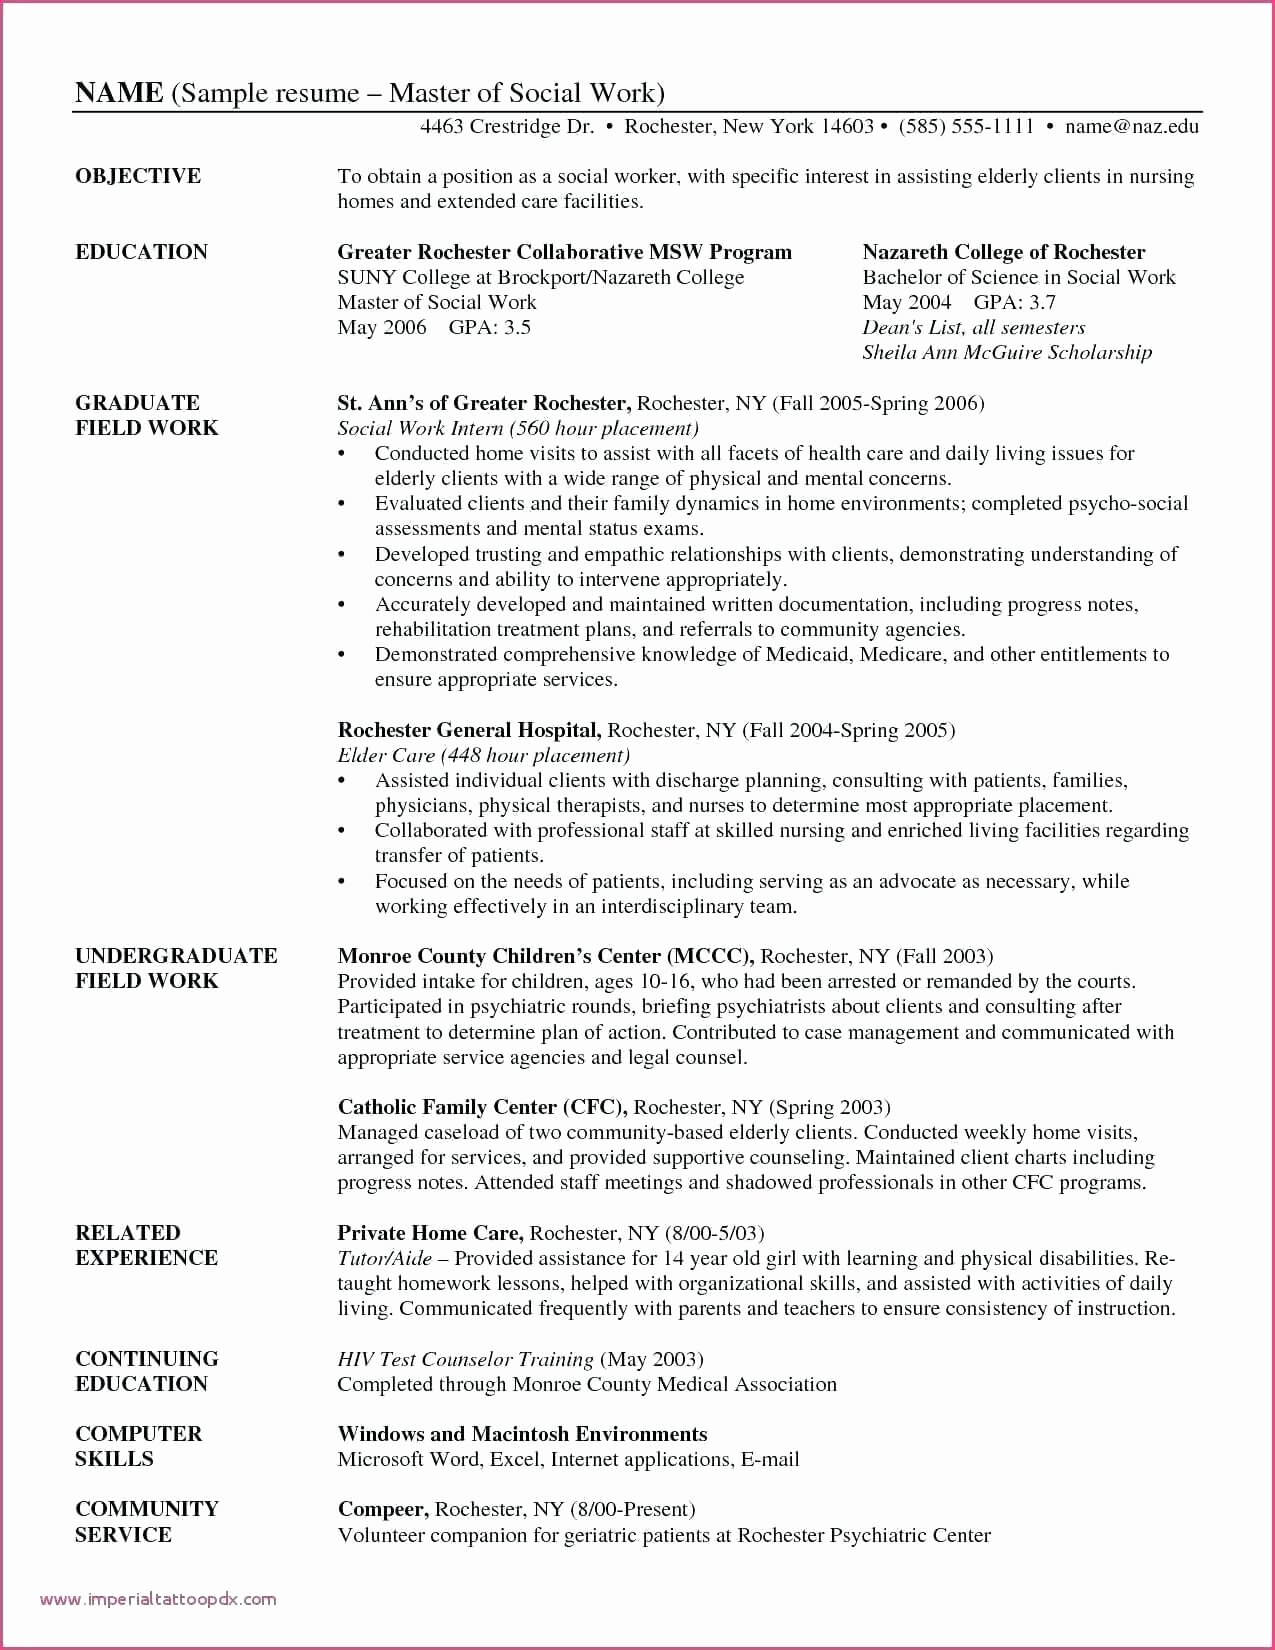 Sample Resume With Masters Degree In Progress Best Of Sample Intended For Case Management Progress Note Template